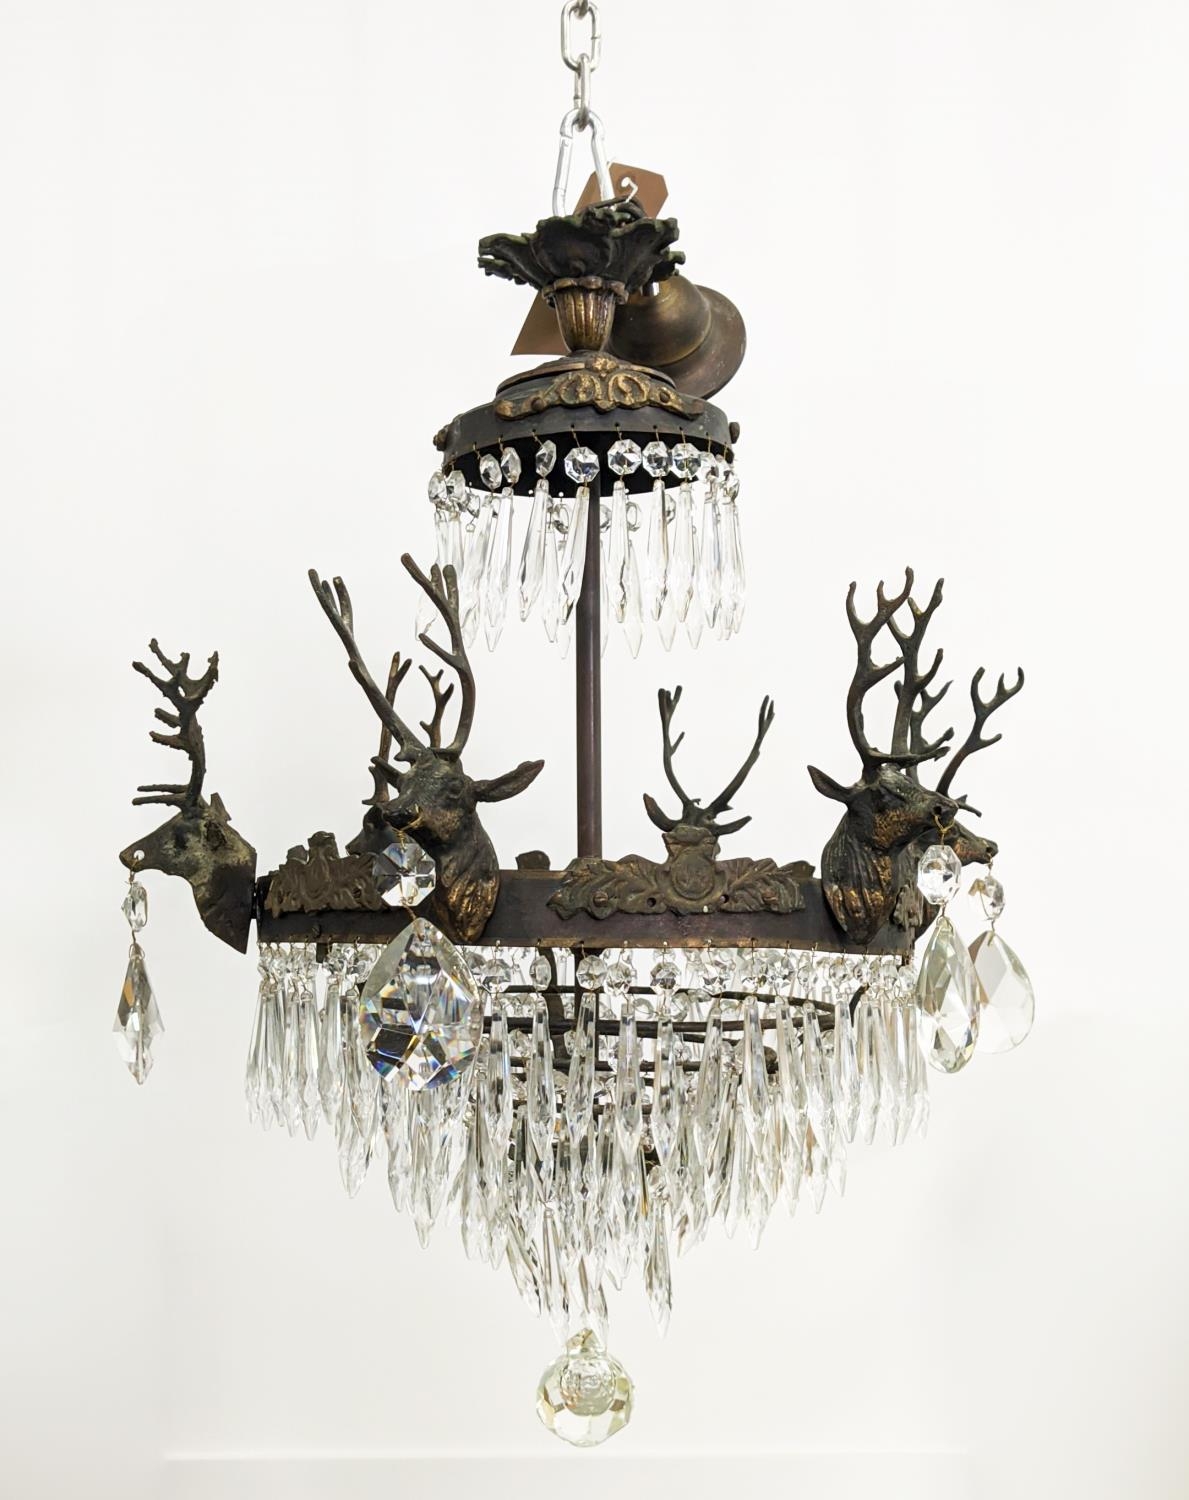 CHANDELIER, gilt metal with stag heads, glass drops and six lights, 53cm W x 85cm H overall.